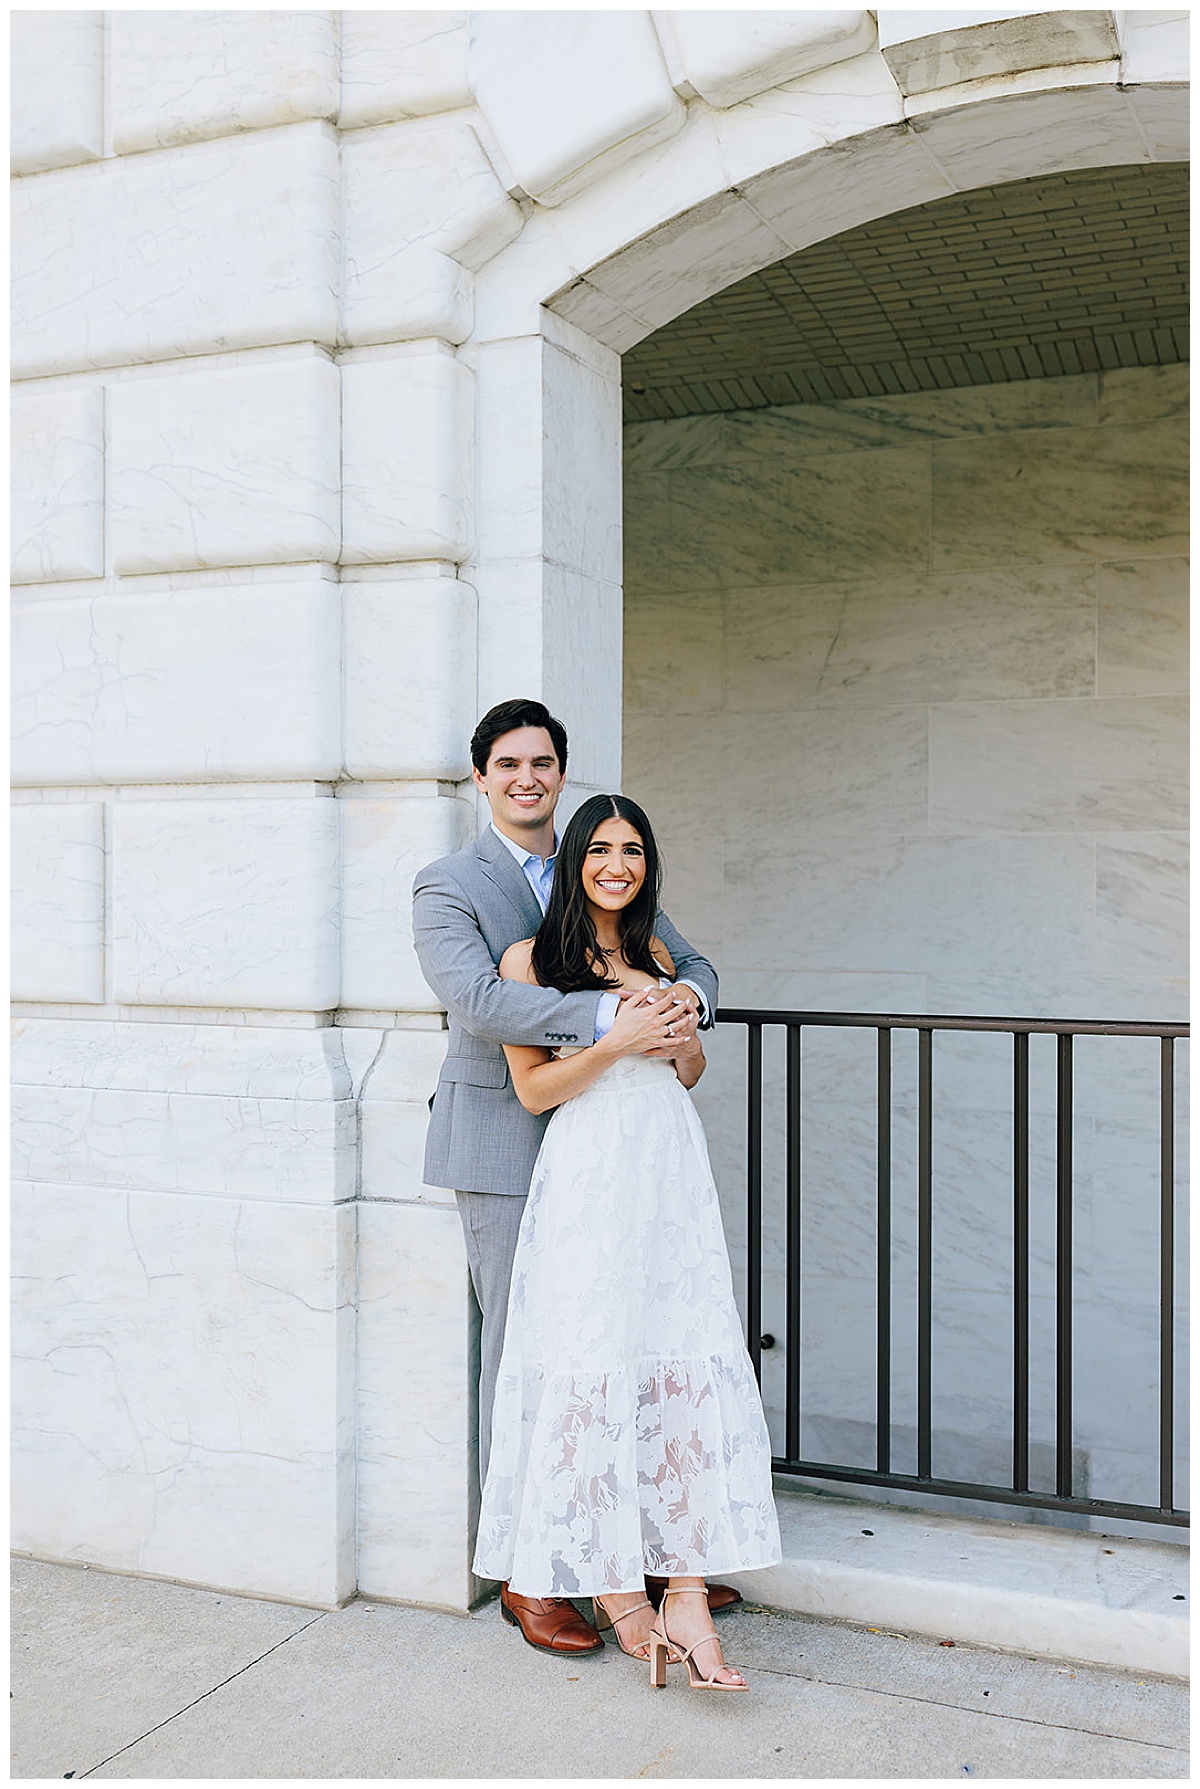 Man holds woman close as they share big smiles for Kayla Bouren Photography